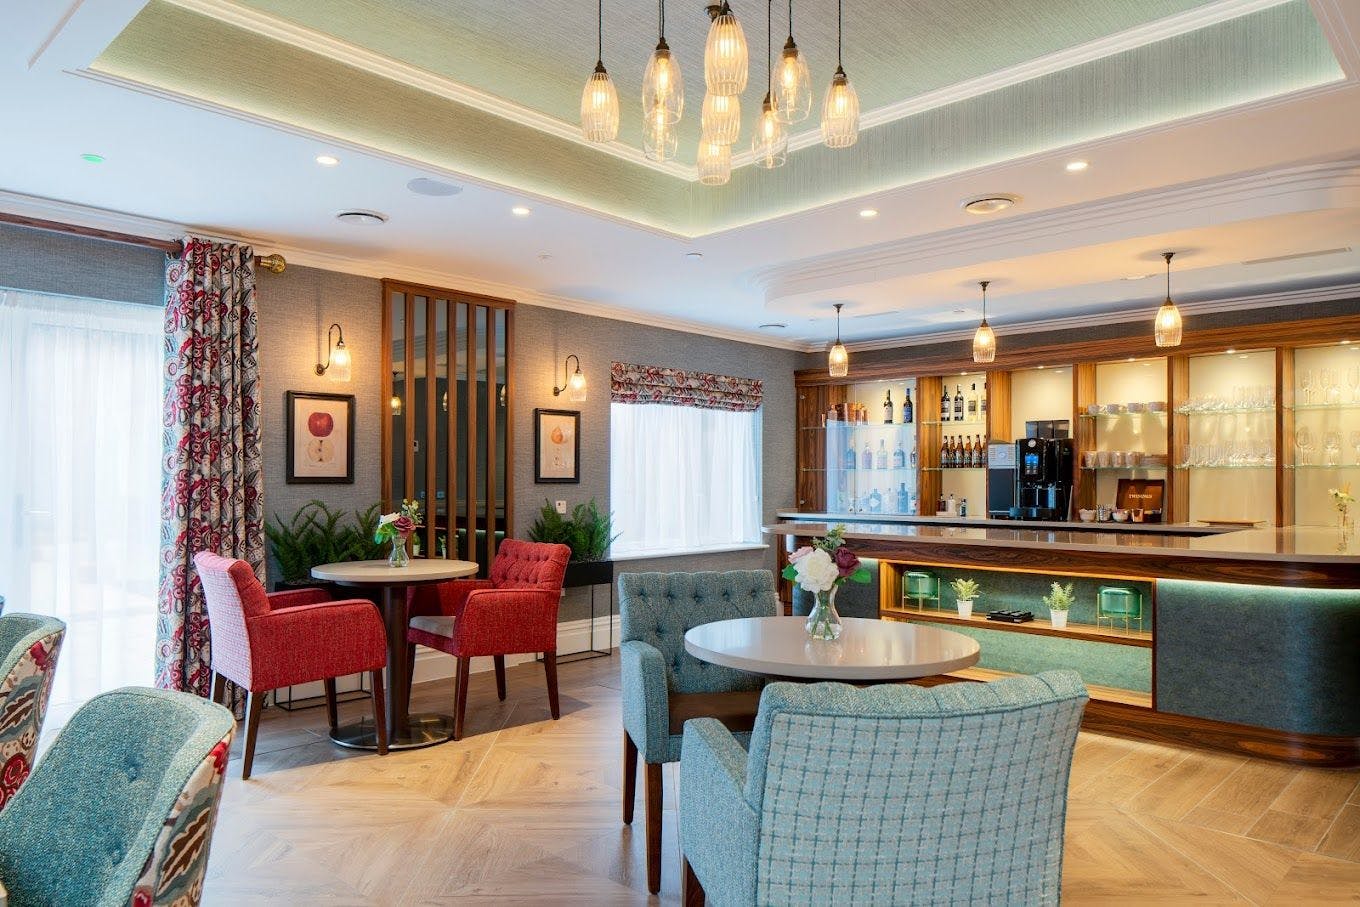 Bar at Cavell Park Care Home in Maidstone, Kent